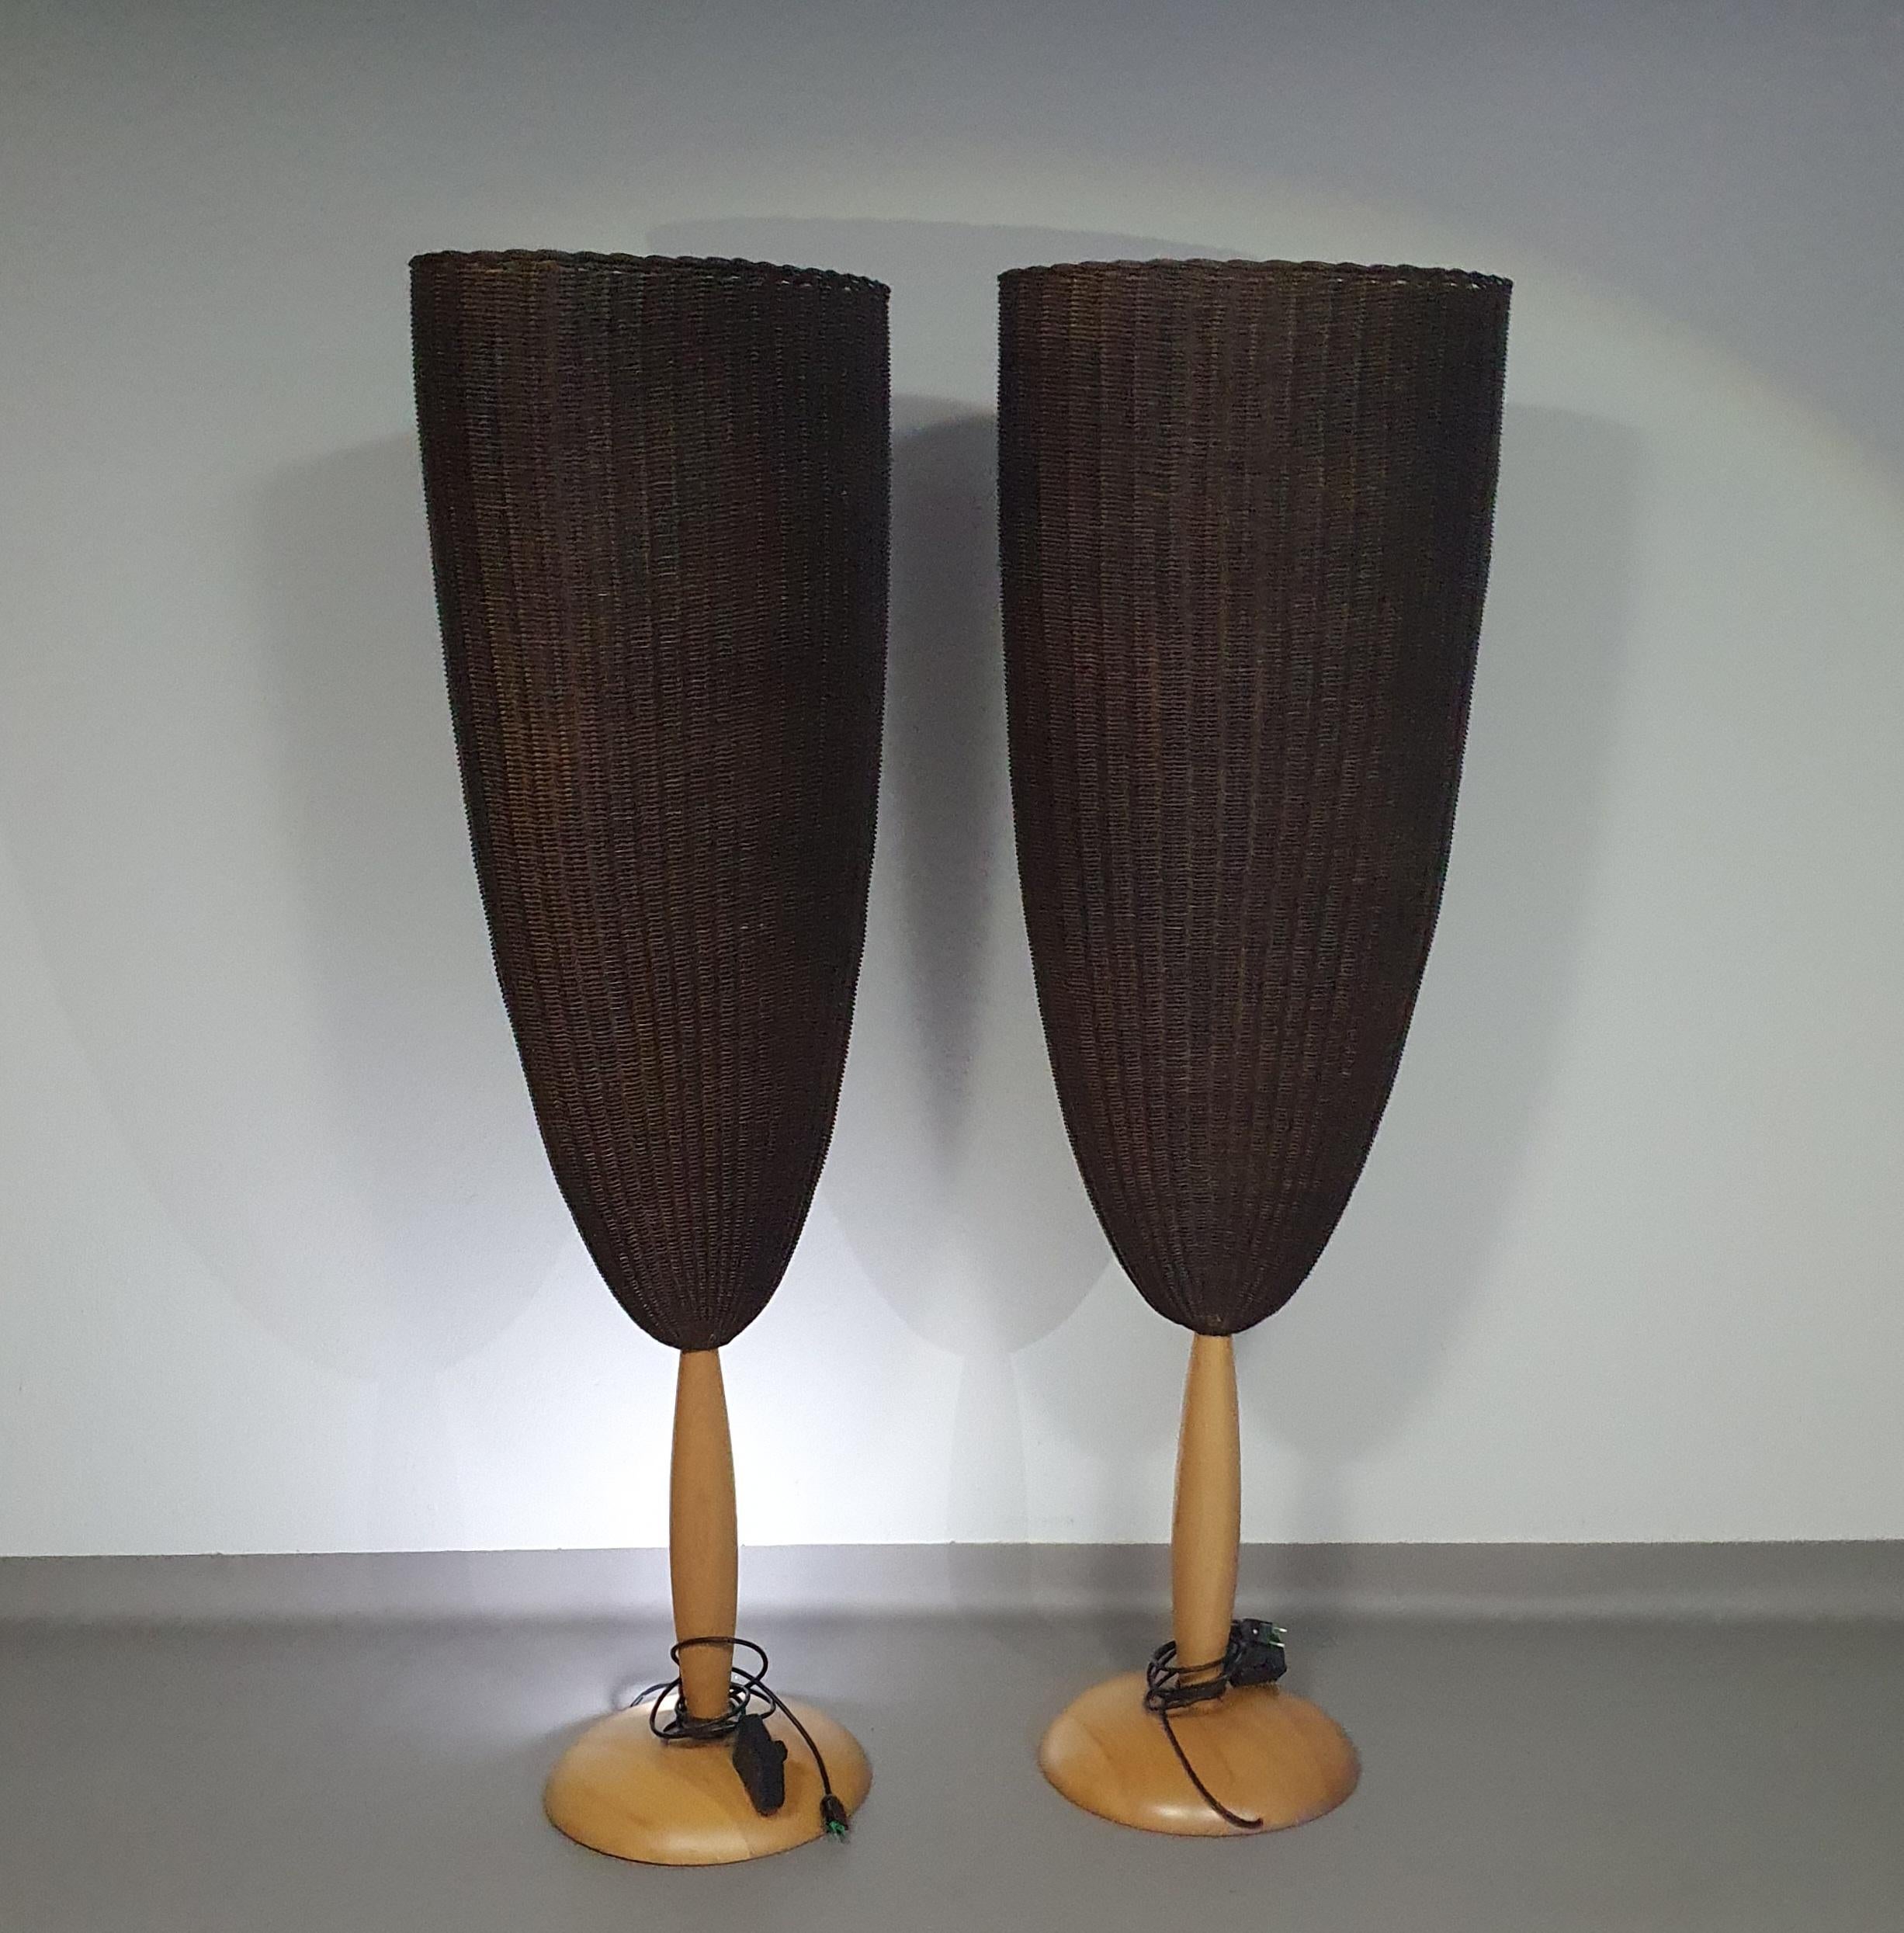 Organic modern Flûte floor lamps with large woven cane lamp shade that sits upon a beech wood carved base designed by Marco Agnoli for Pierantonio Bonacina, Italy 1991.